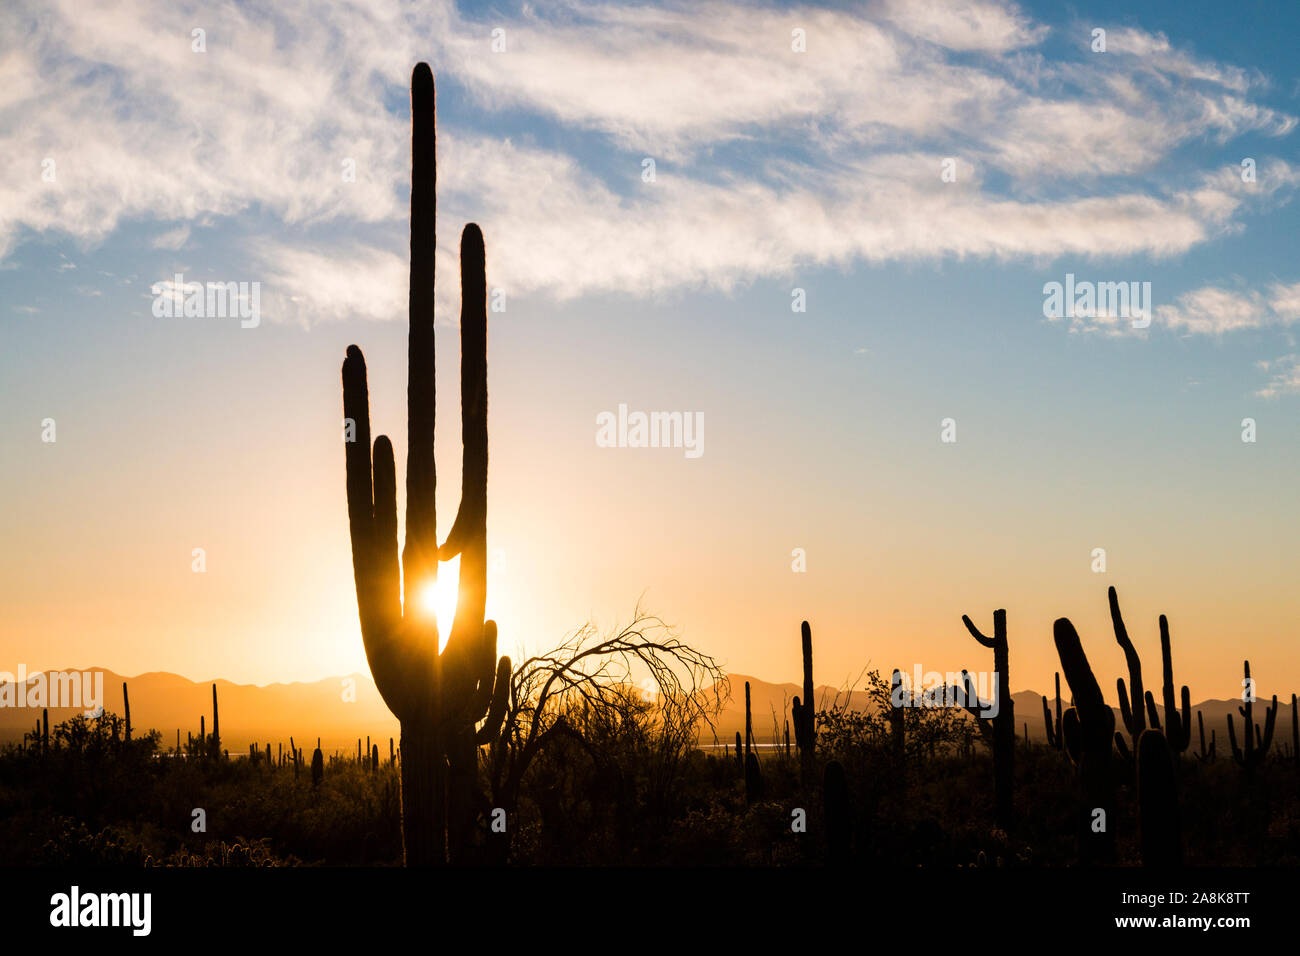 Landscape view during sunset in Saguaro National Park near Tucson ...